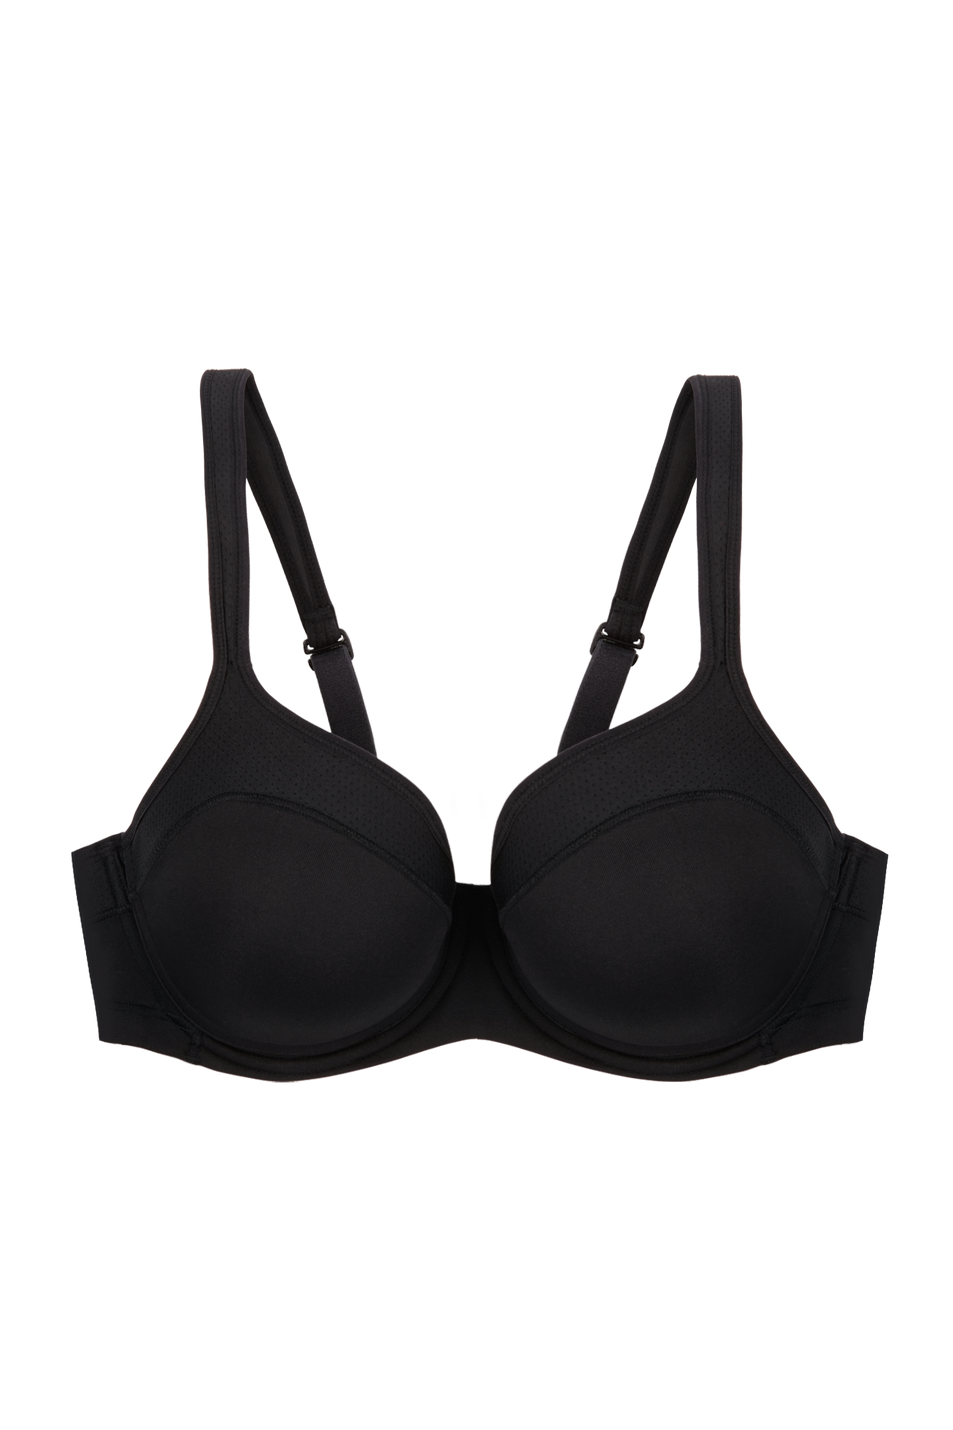 Buy ACTIVE CONTOUR BRA online at Intimo